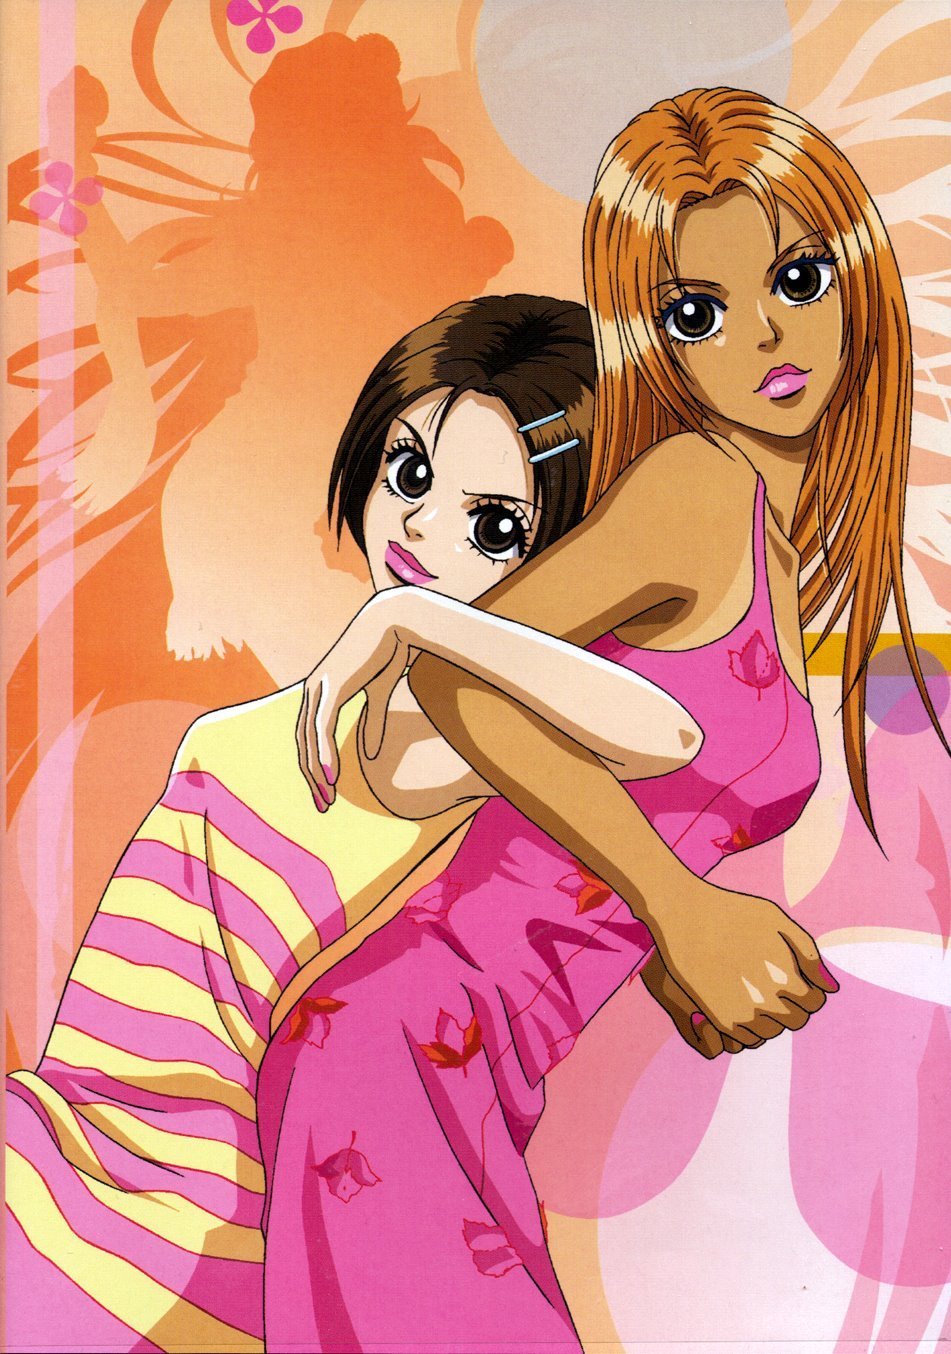 Peach Girl images Peach Girl HD wallpaper and background photos